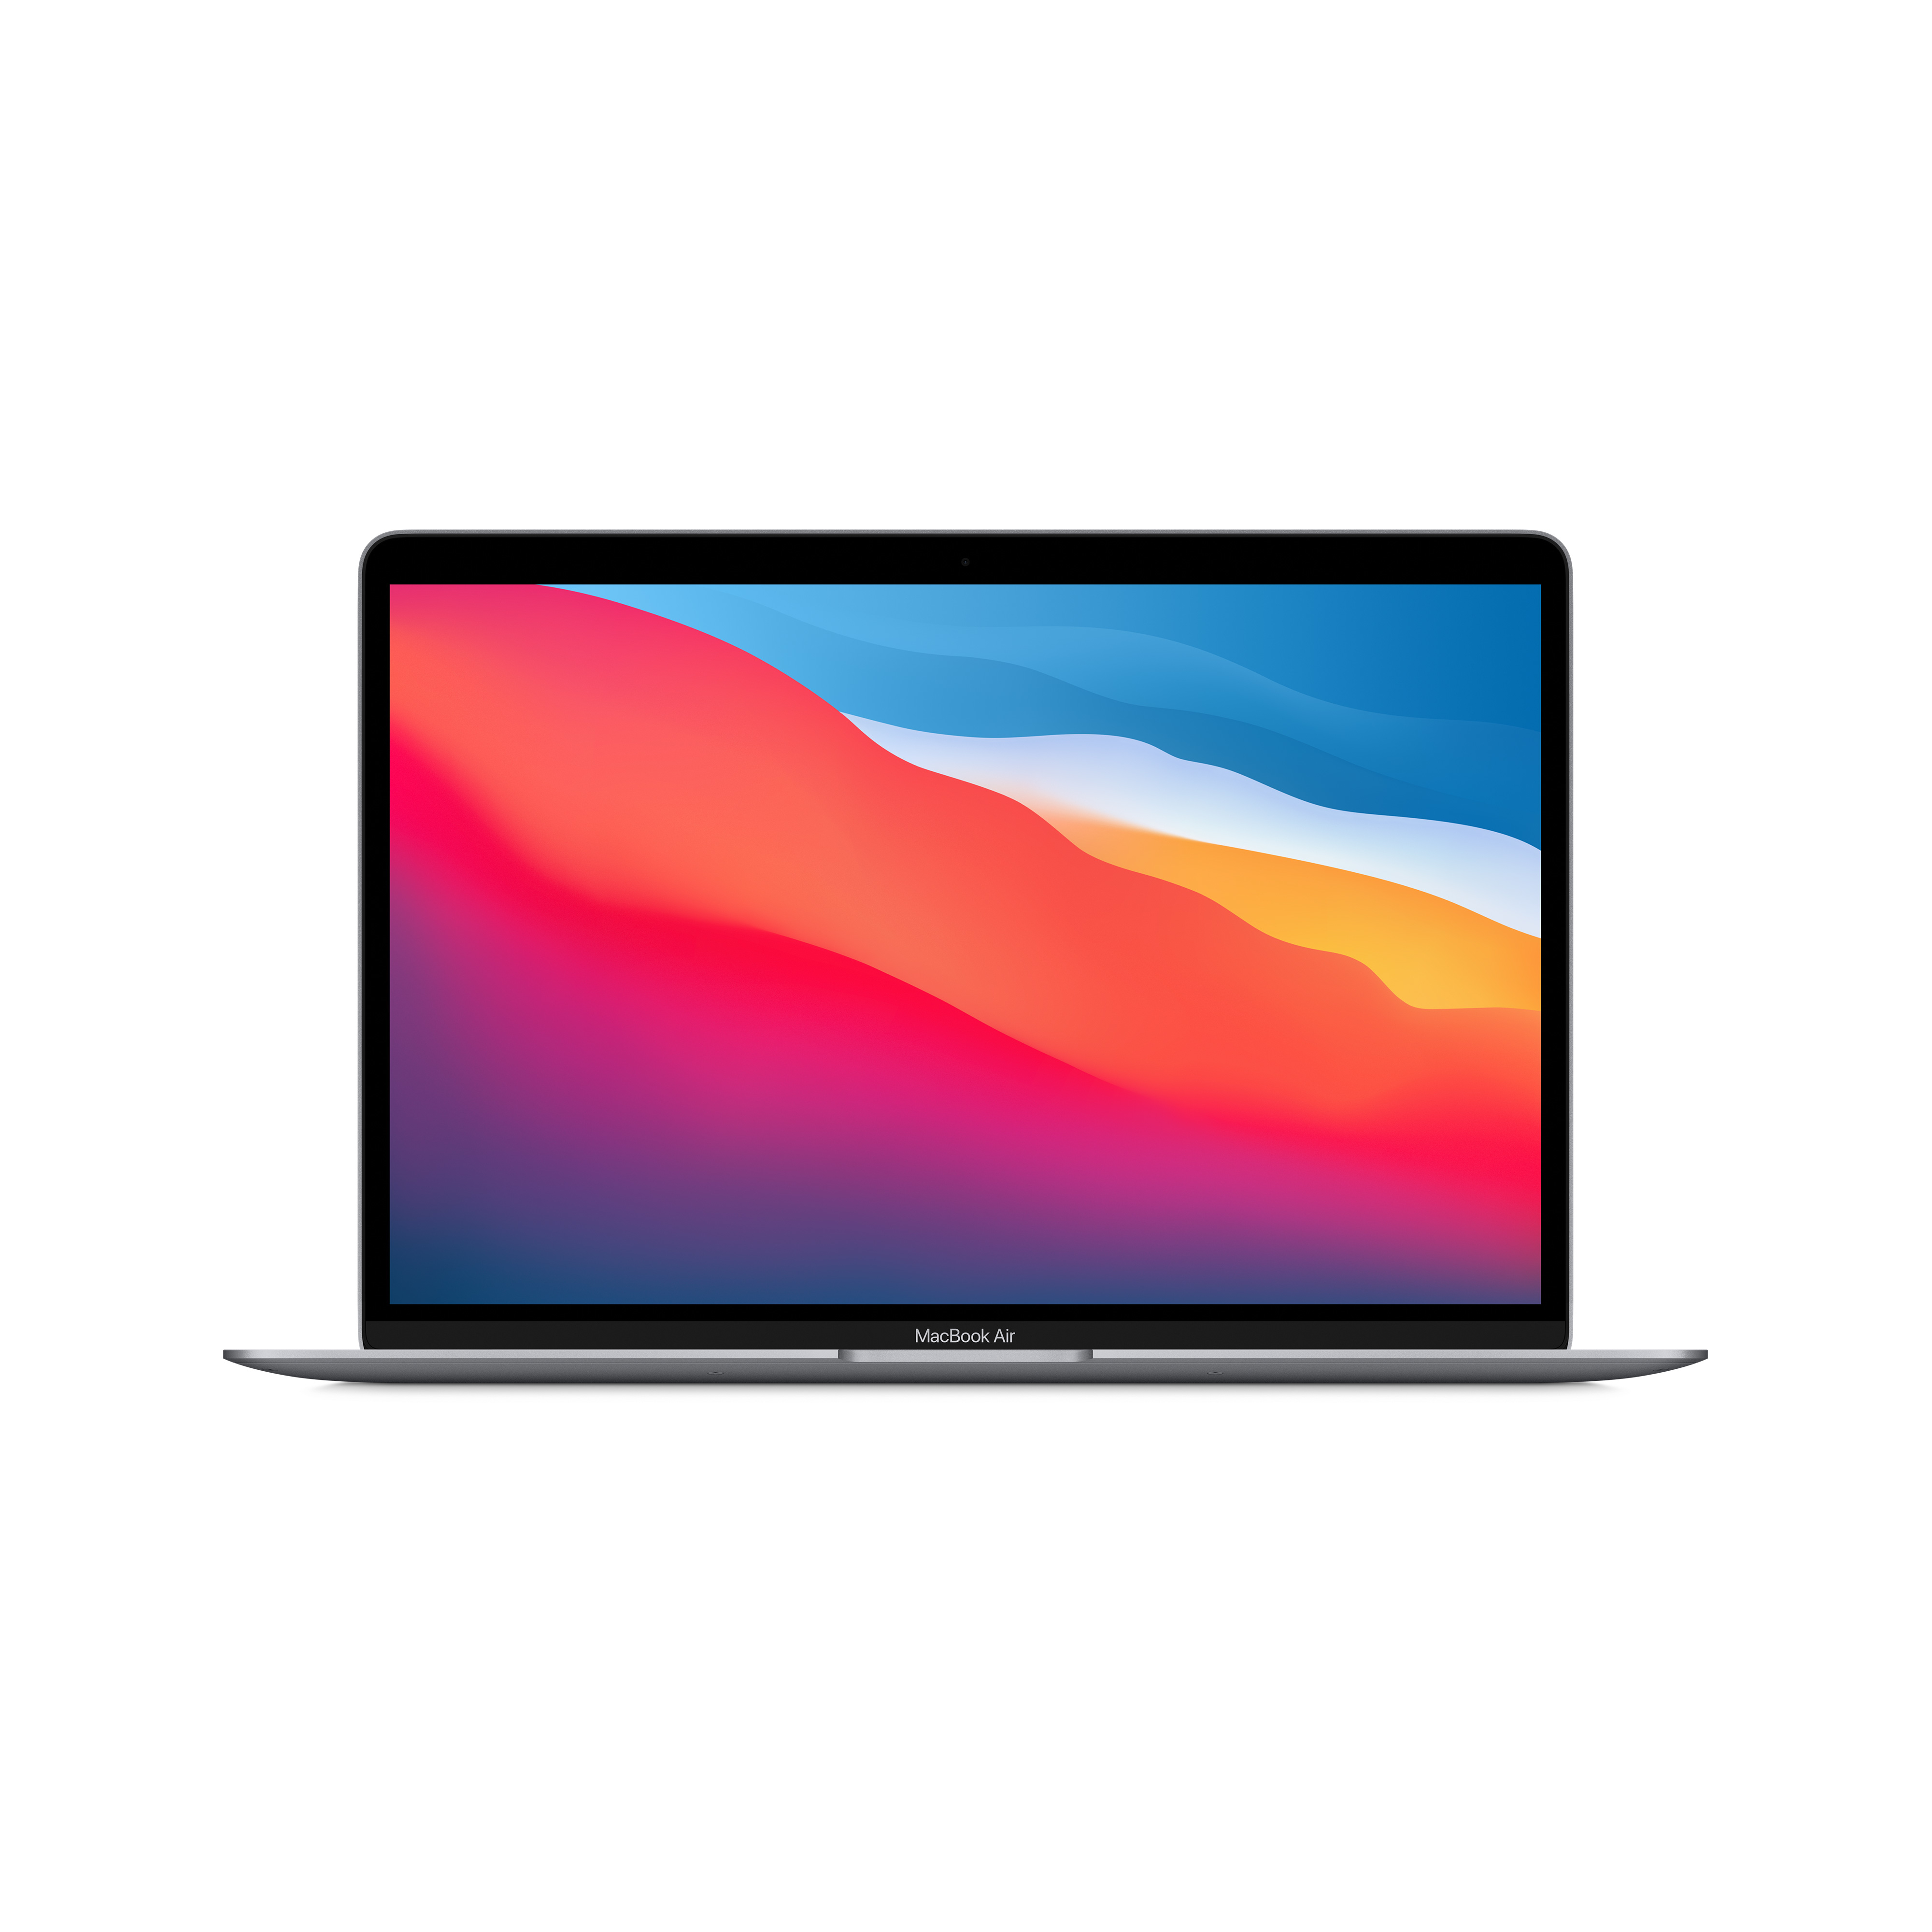  13inch (2020) MacBook Air:  M1 chip with 8core CPU and 7core GPU 256GB Space Grey Qwerty